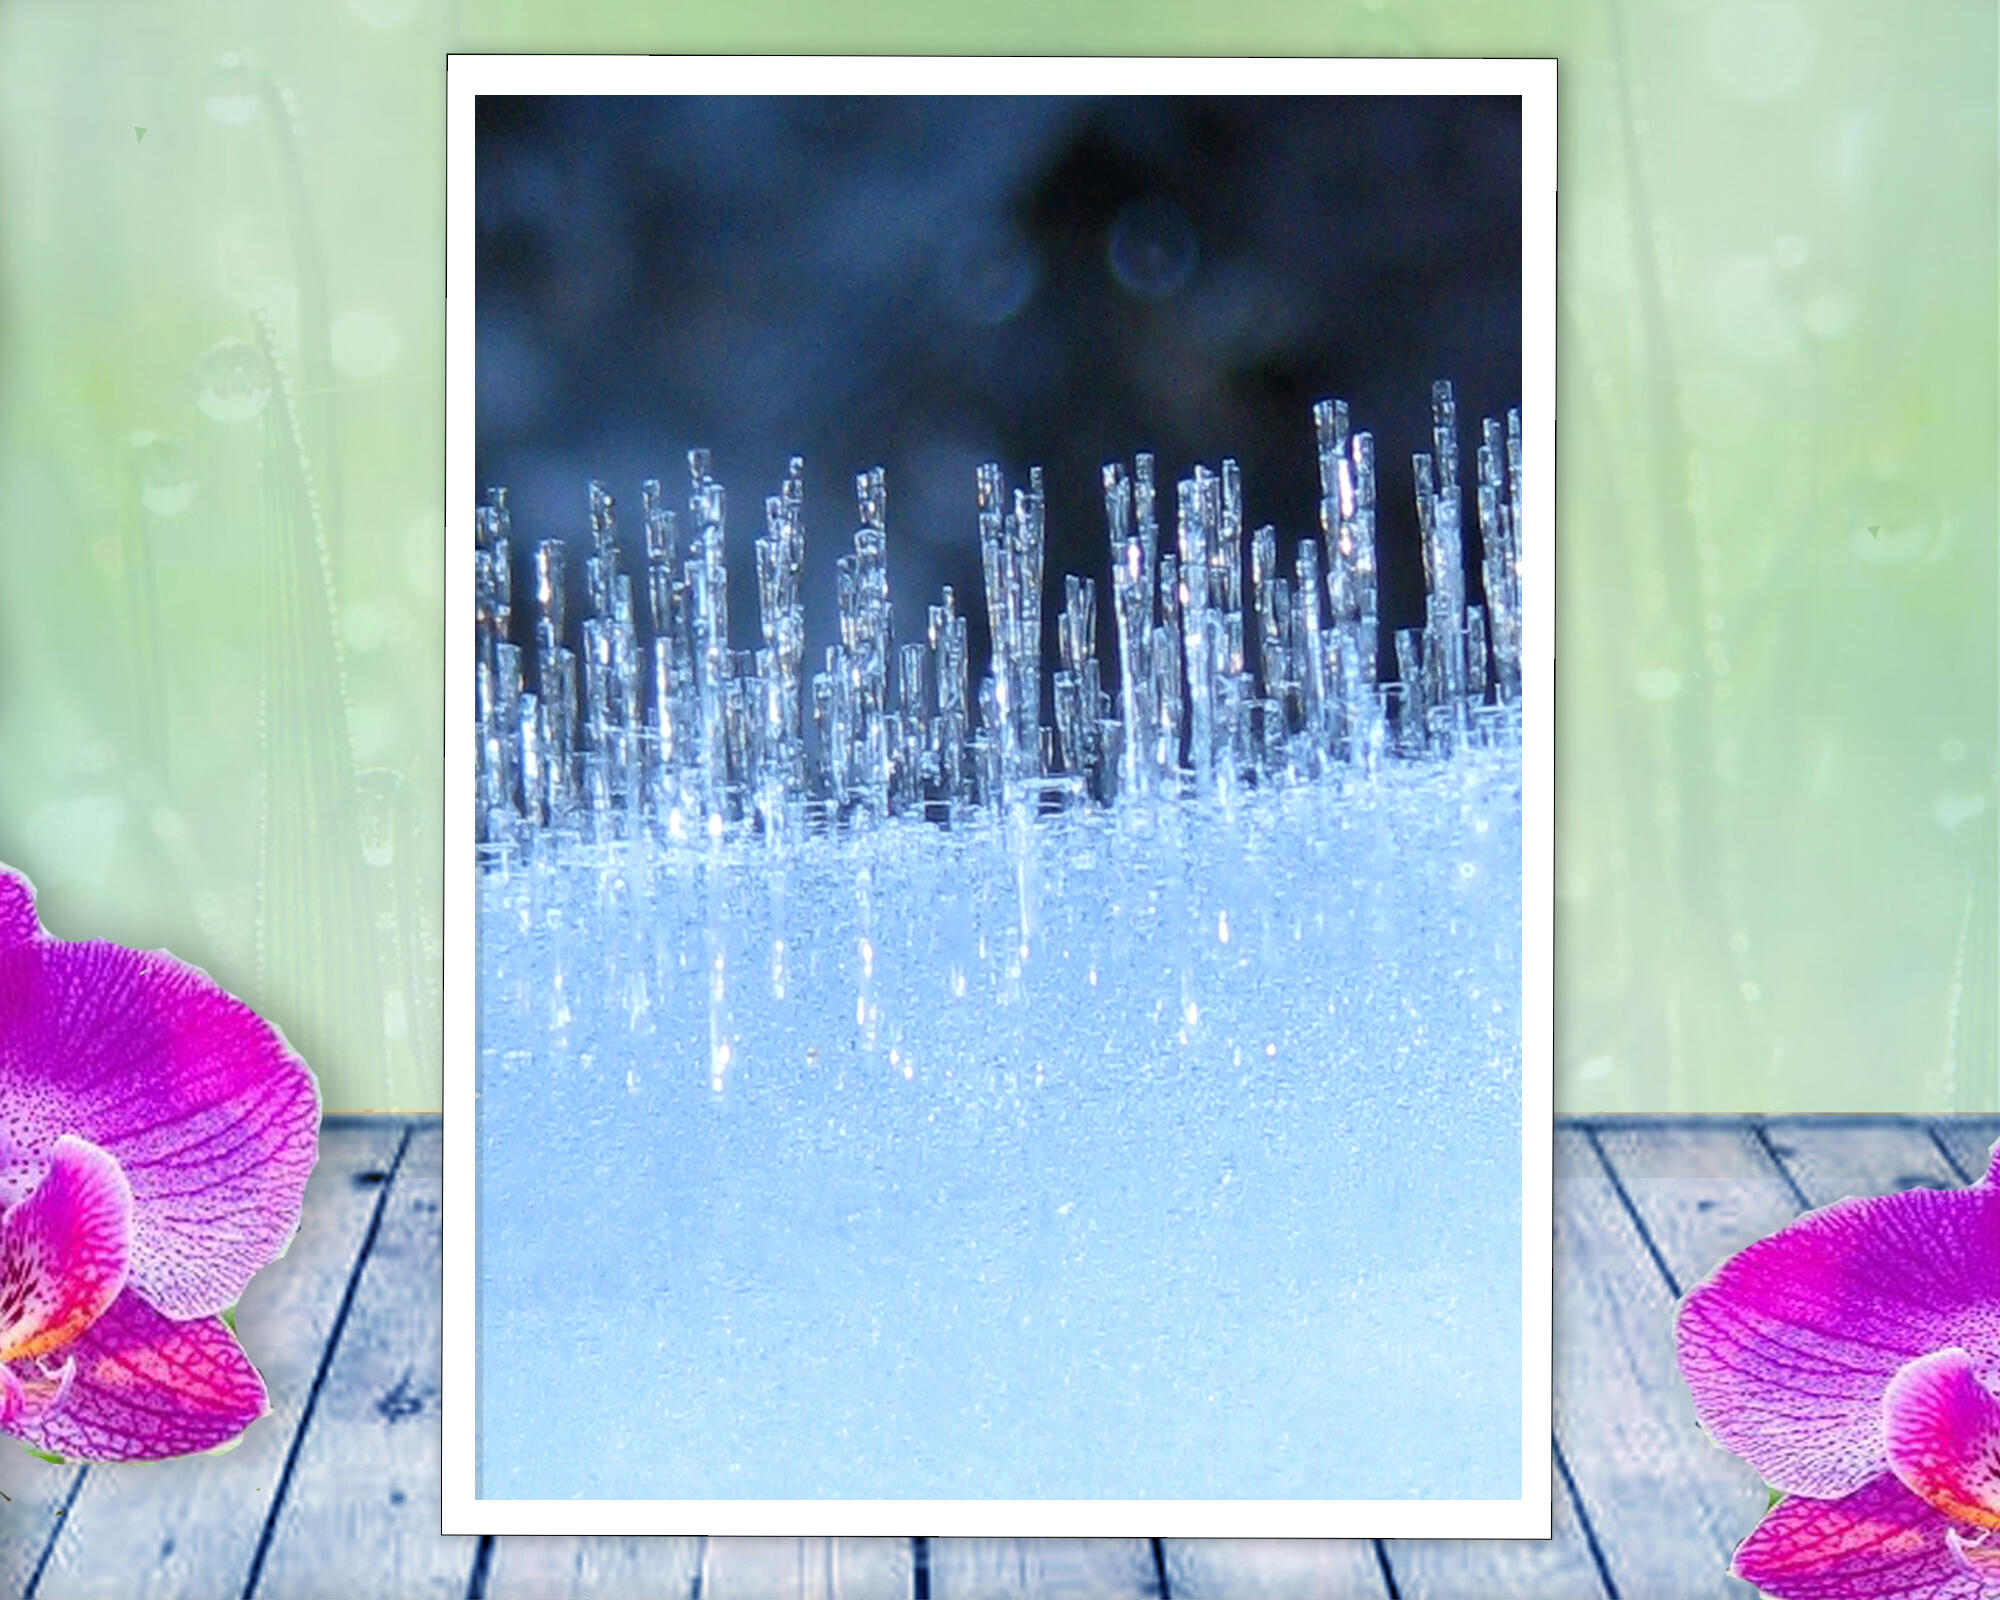 Crystals of ice greet the day in this imaginative, intriguing, Nature Spirit Story. Photo with Poem - Ice People by The Poetry of Nature
Crystals of ice greet the day in this imaginative, intriguing, Nature Spirit Story. Photo with Poem - Ice People by The Poetry of Nature